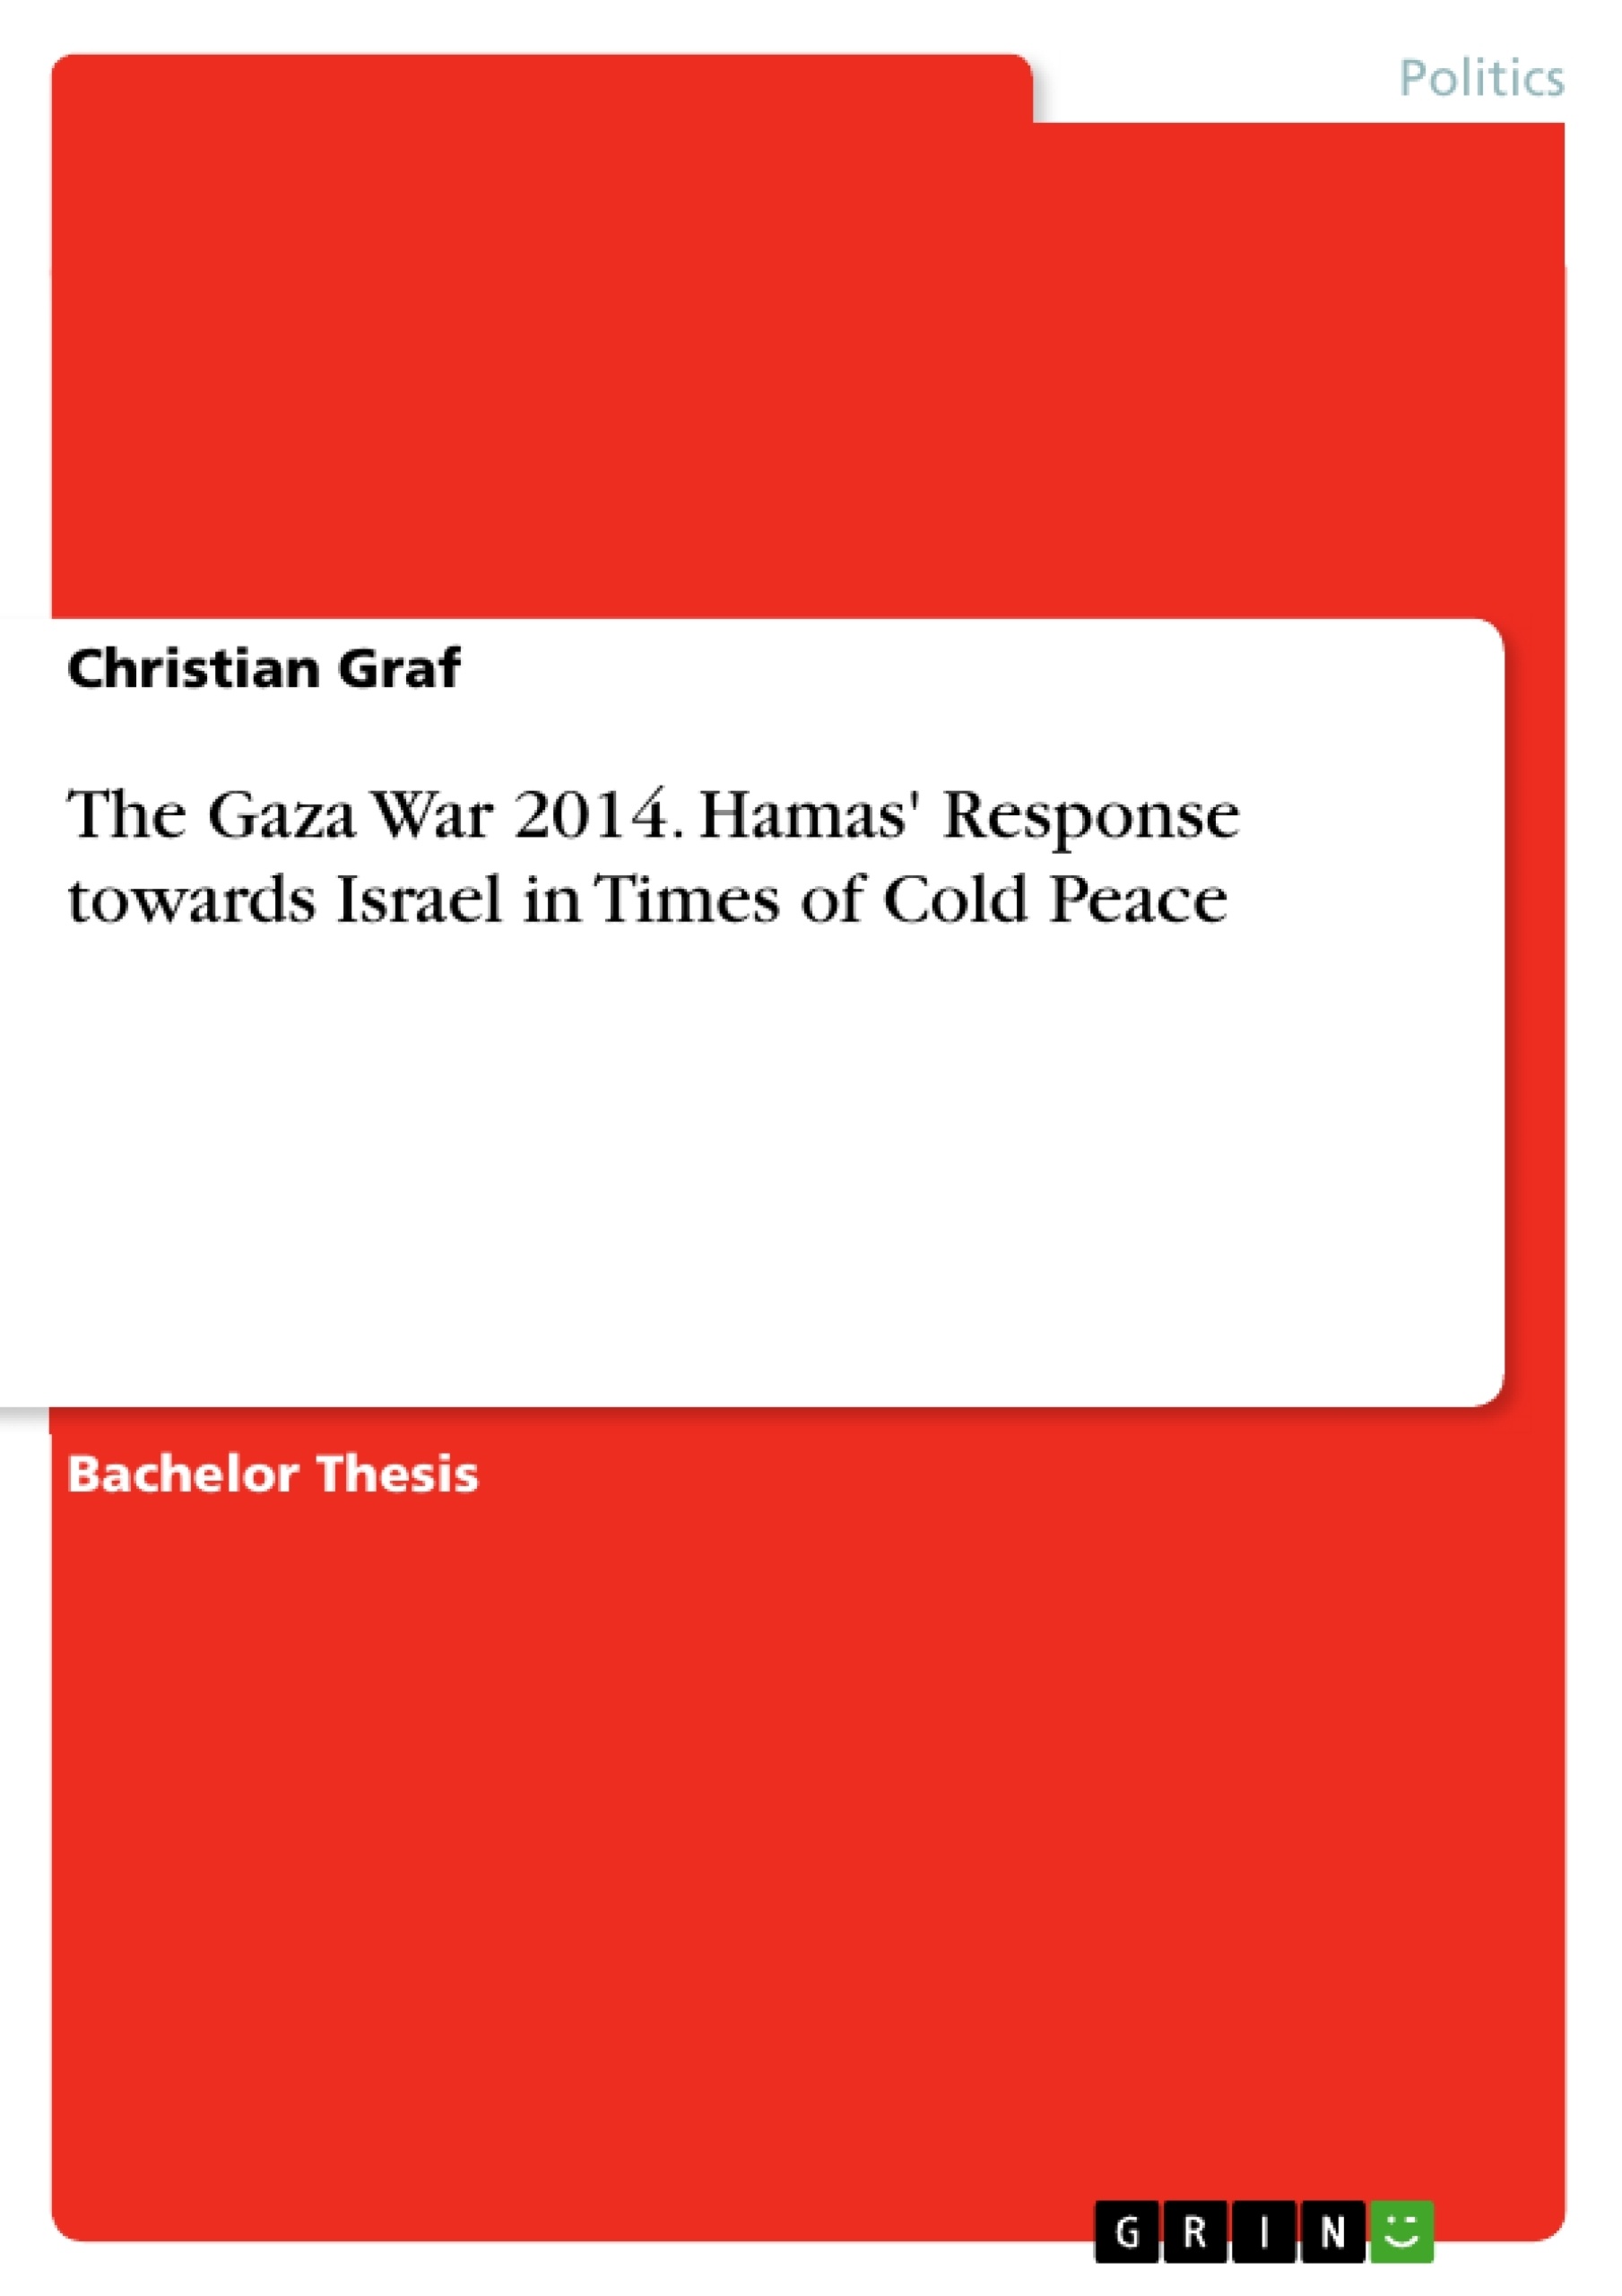 Titre: The Gaza War 2014. Hamas' Response towards Israel in Times of Cold Peace